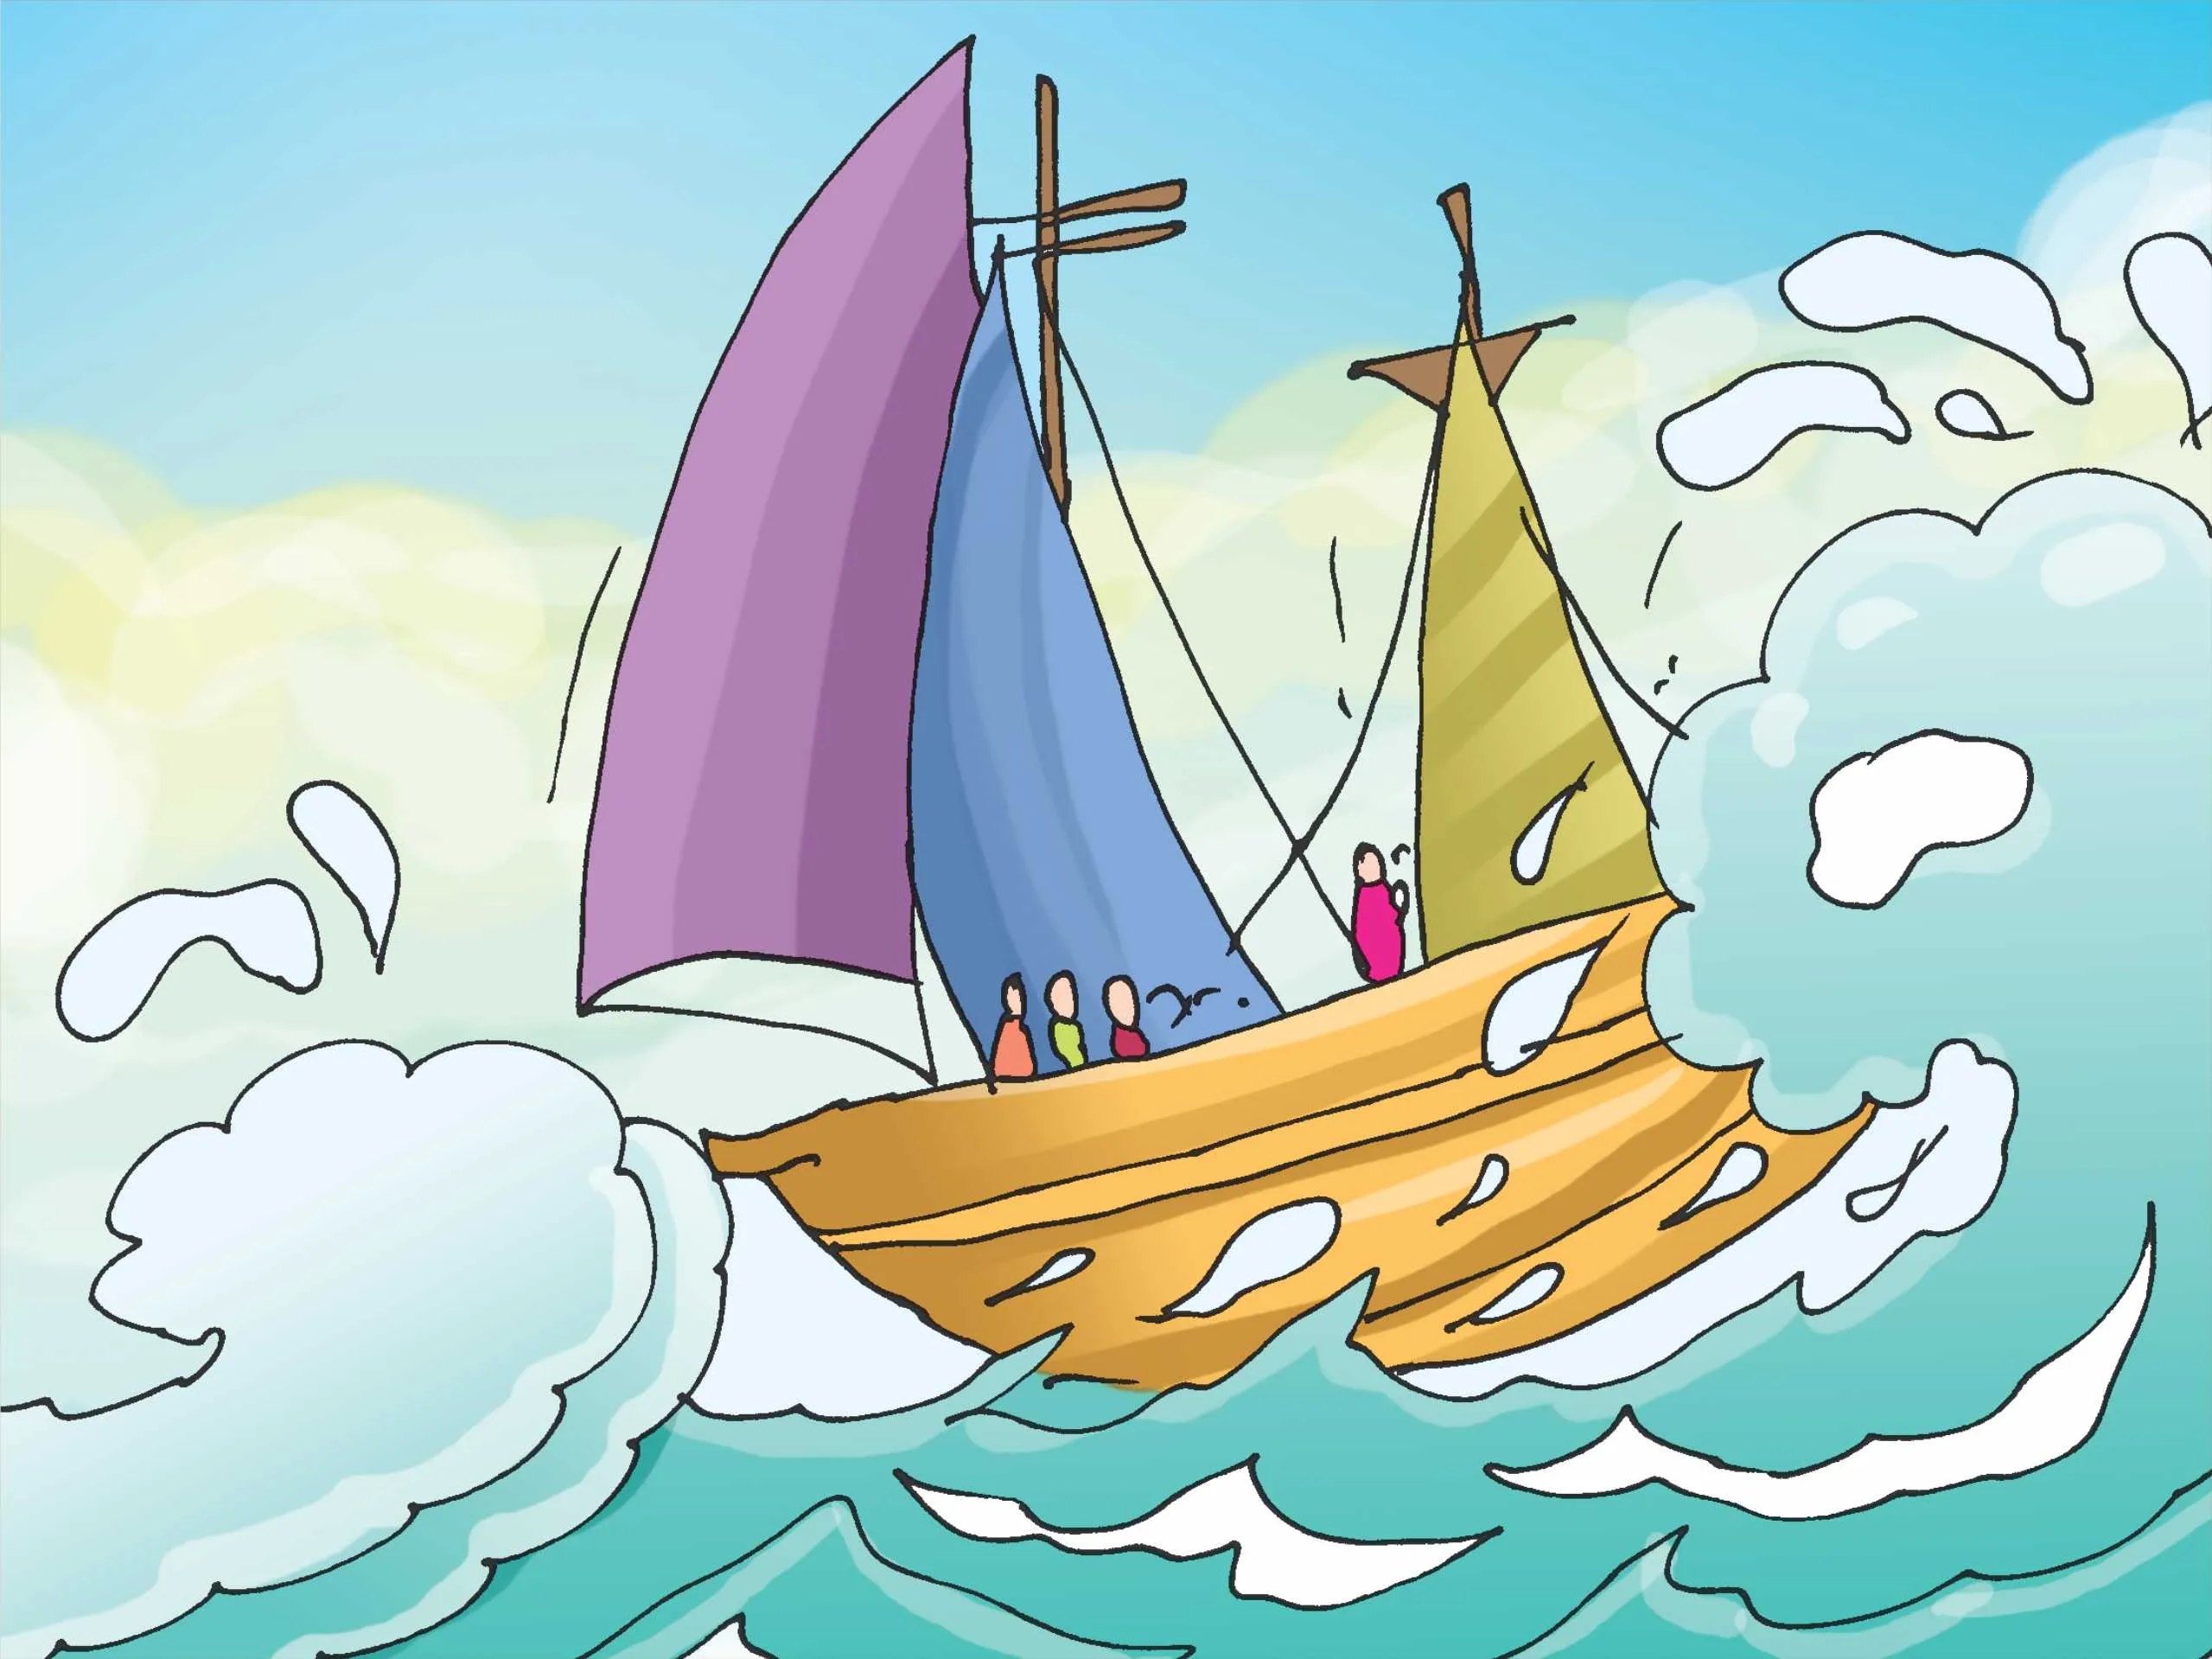 Ship in sea During Bad Weather Cartoon Image